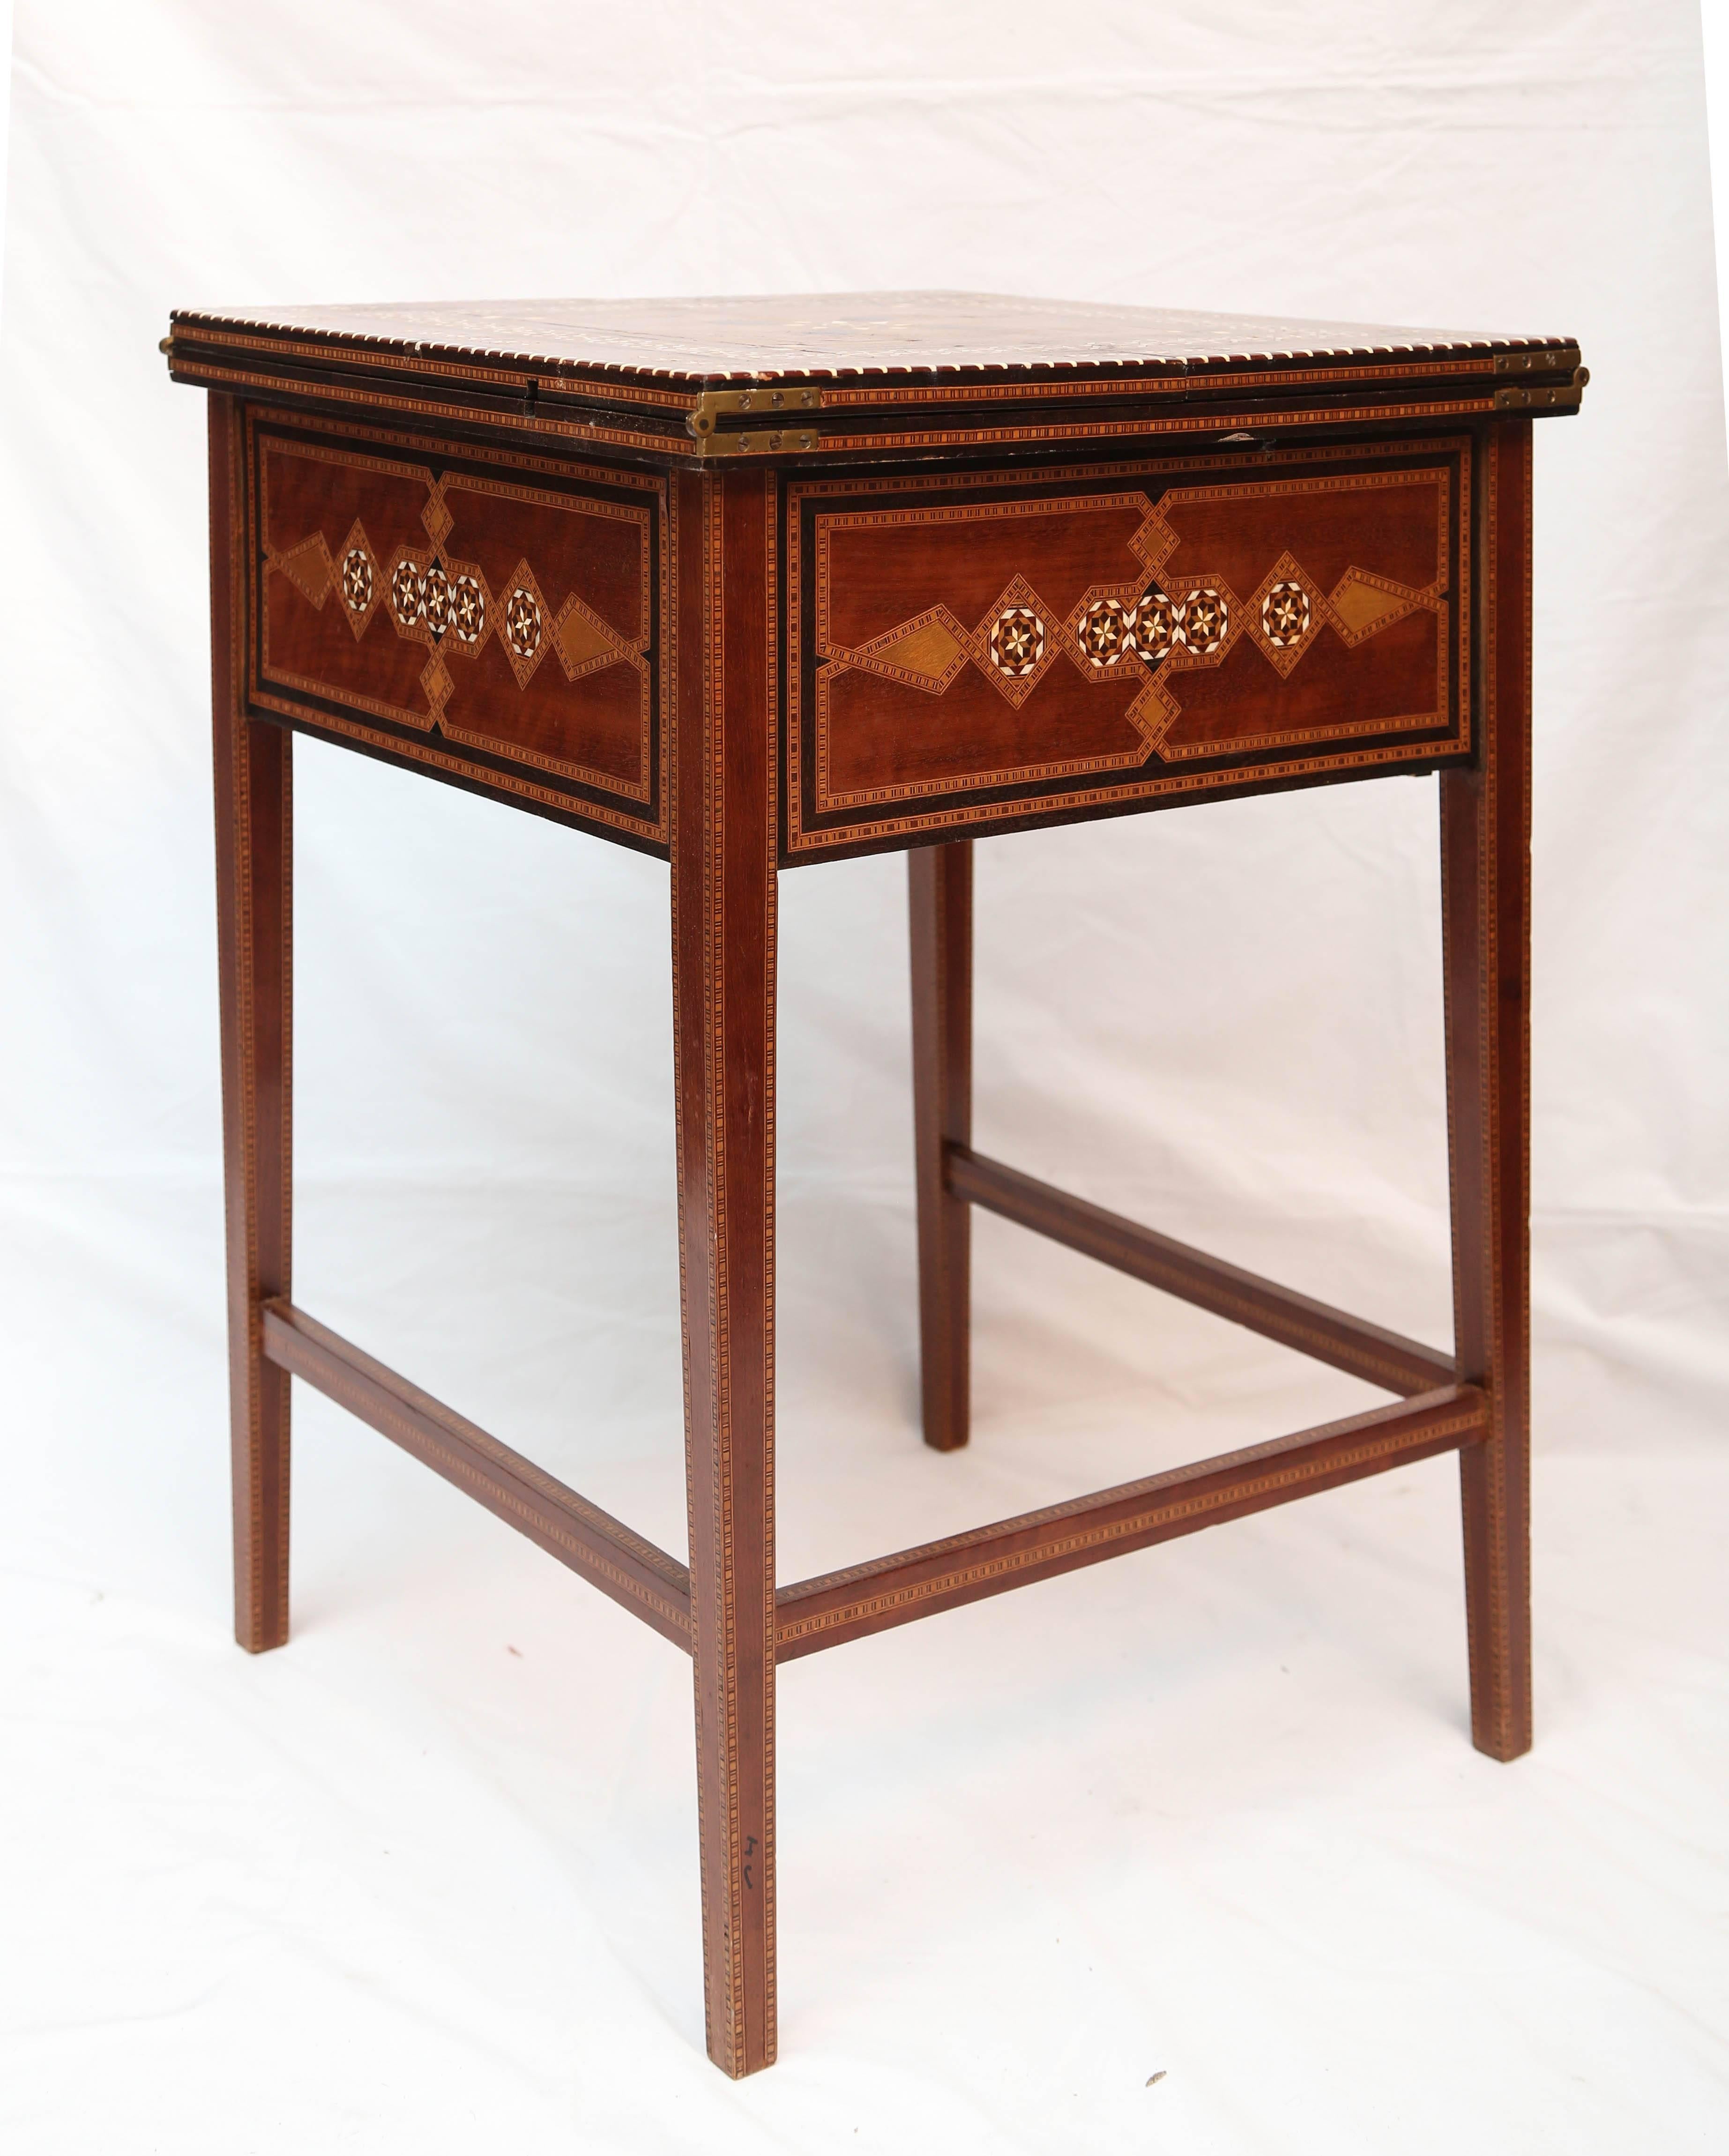 A plethora of inlays abound in this finely made, space efficient lady's desk. It is fitted with letter racks, an inkwell and finely appointed drawers. The desk 